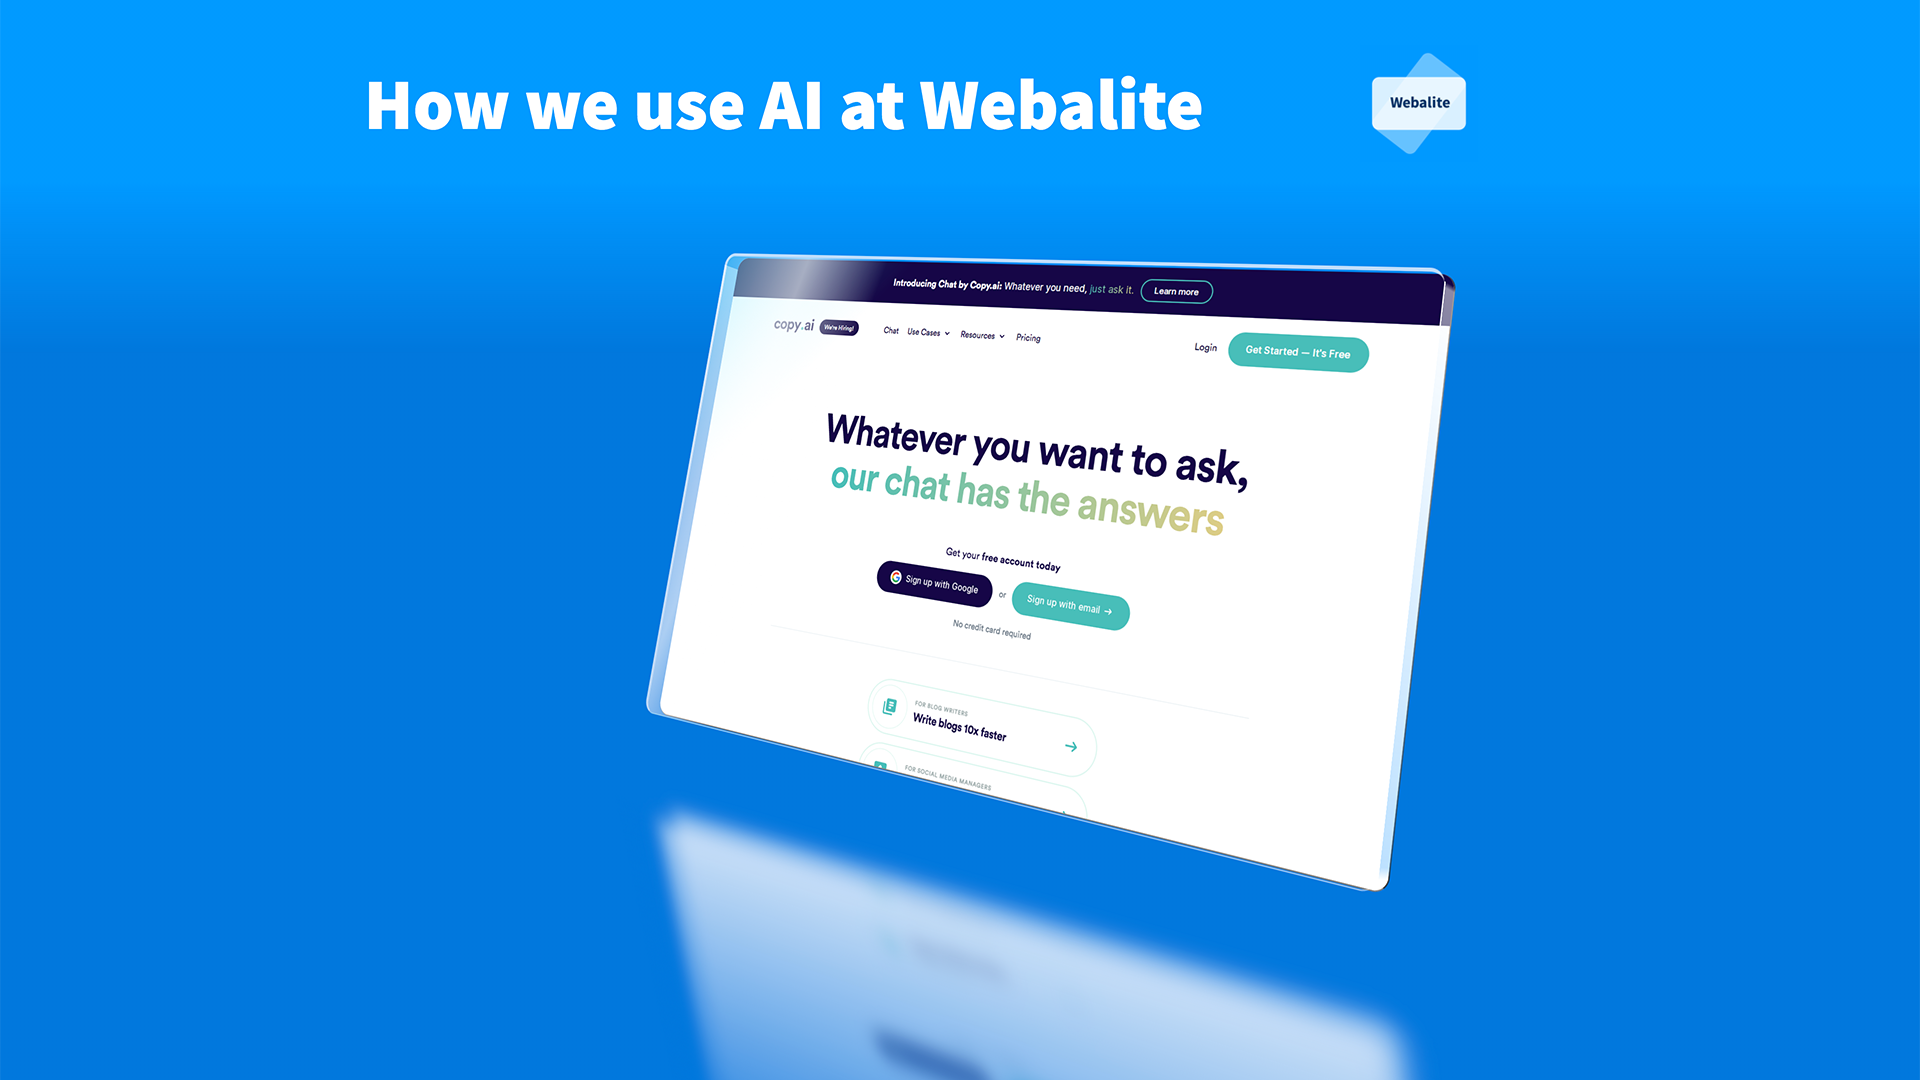 How we have been using AI at Webalite